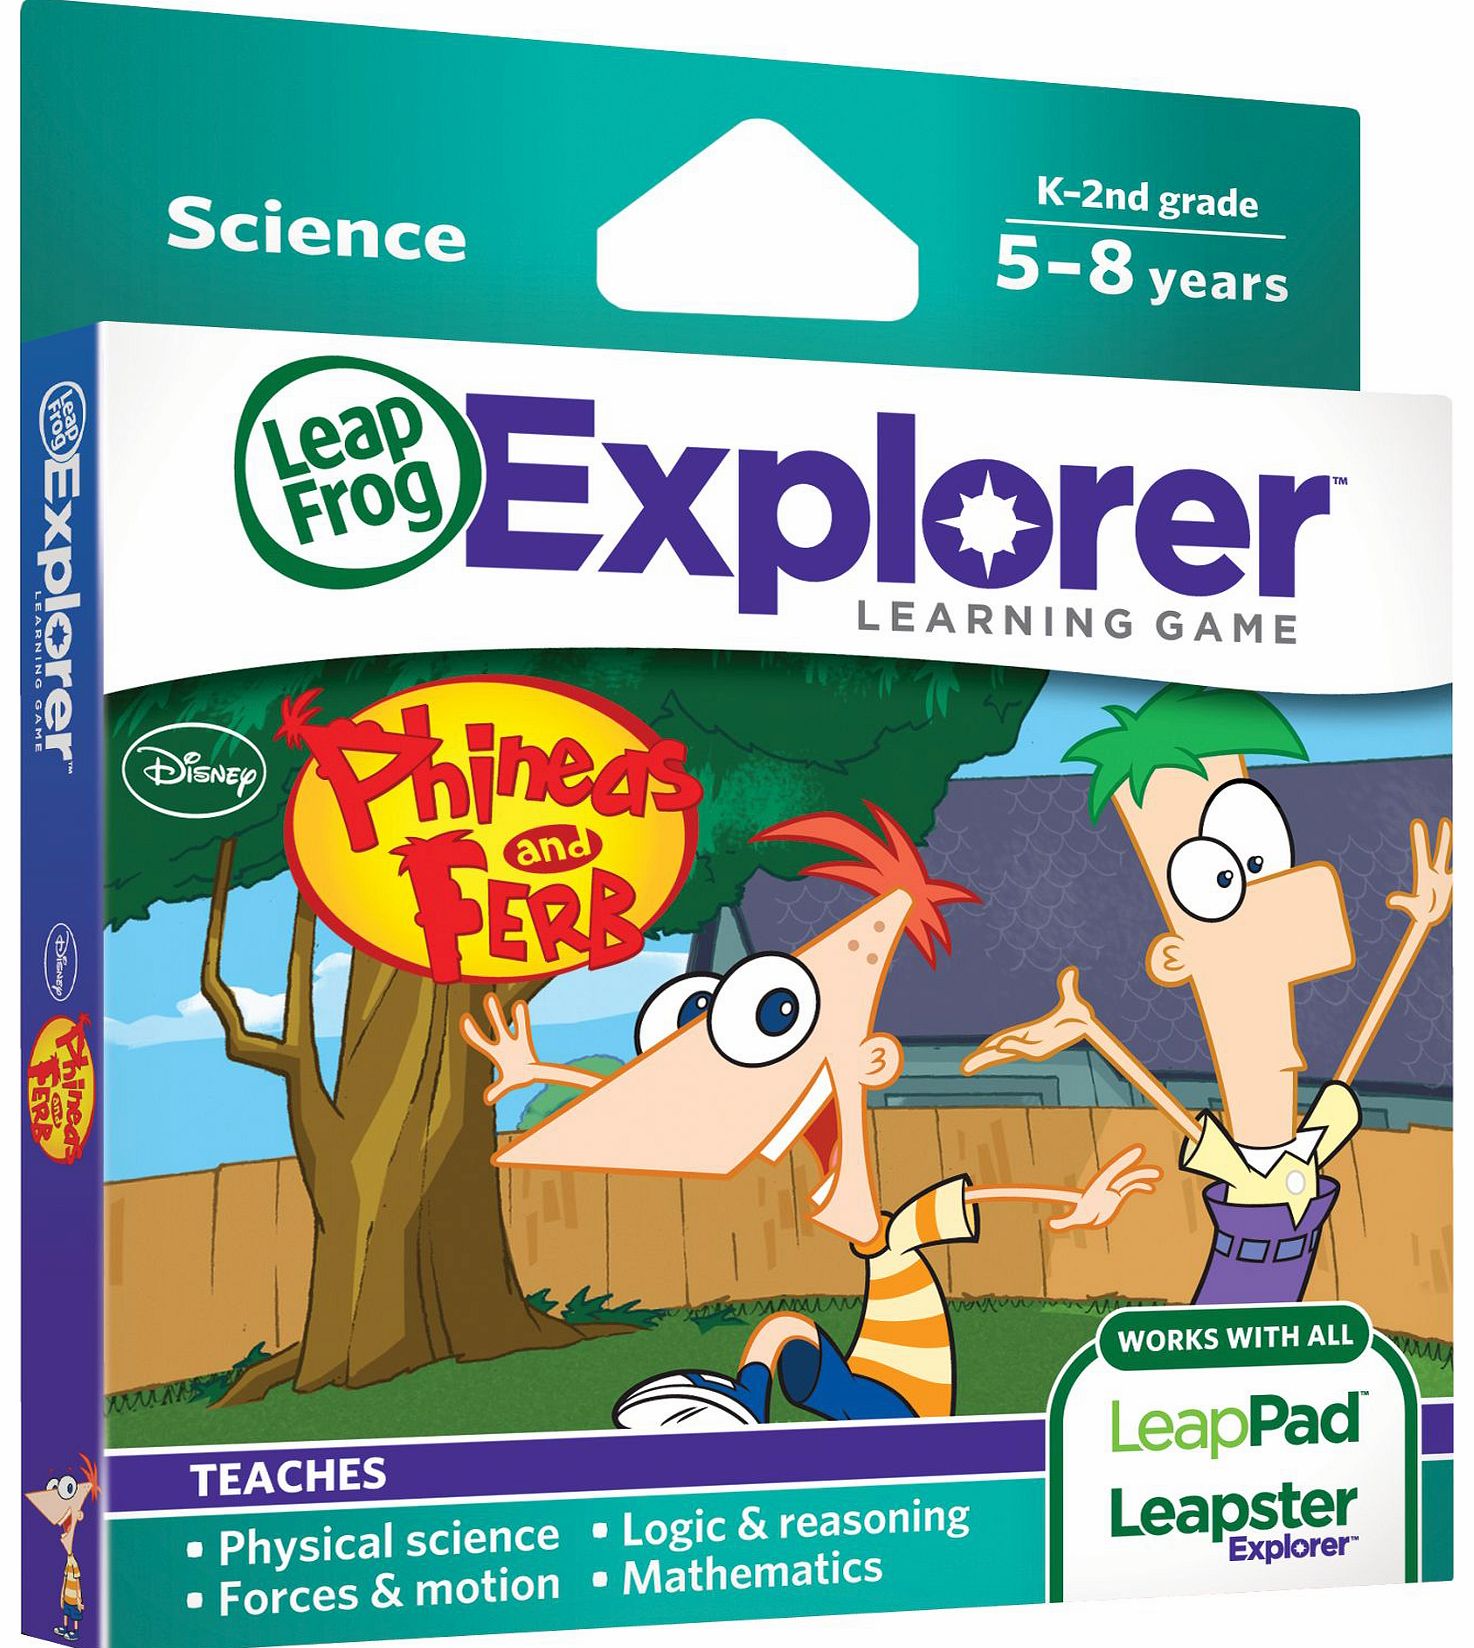 LeapFrog Explorer Learning Game - Disney Phineas and Ferb